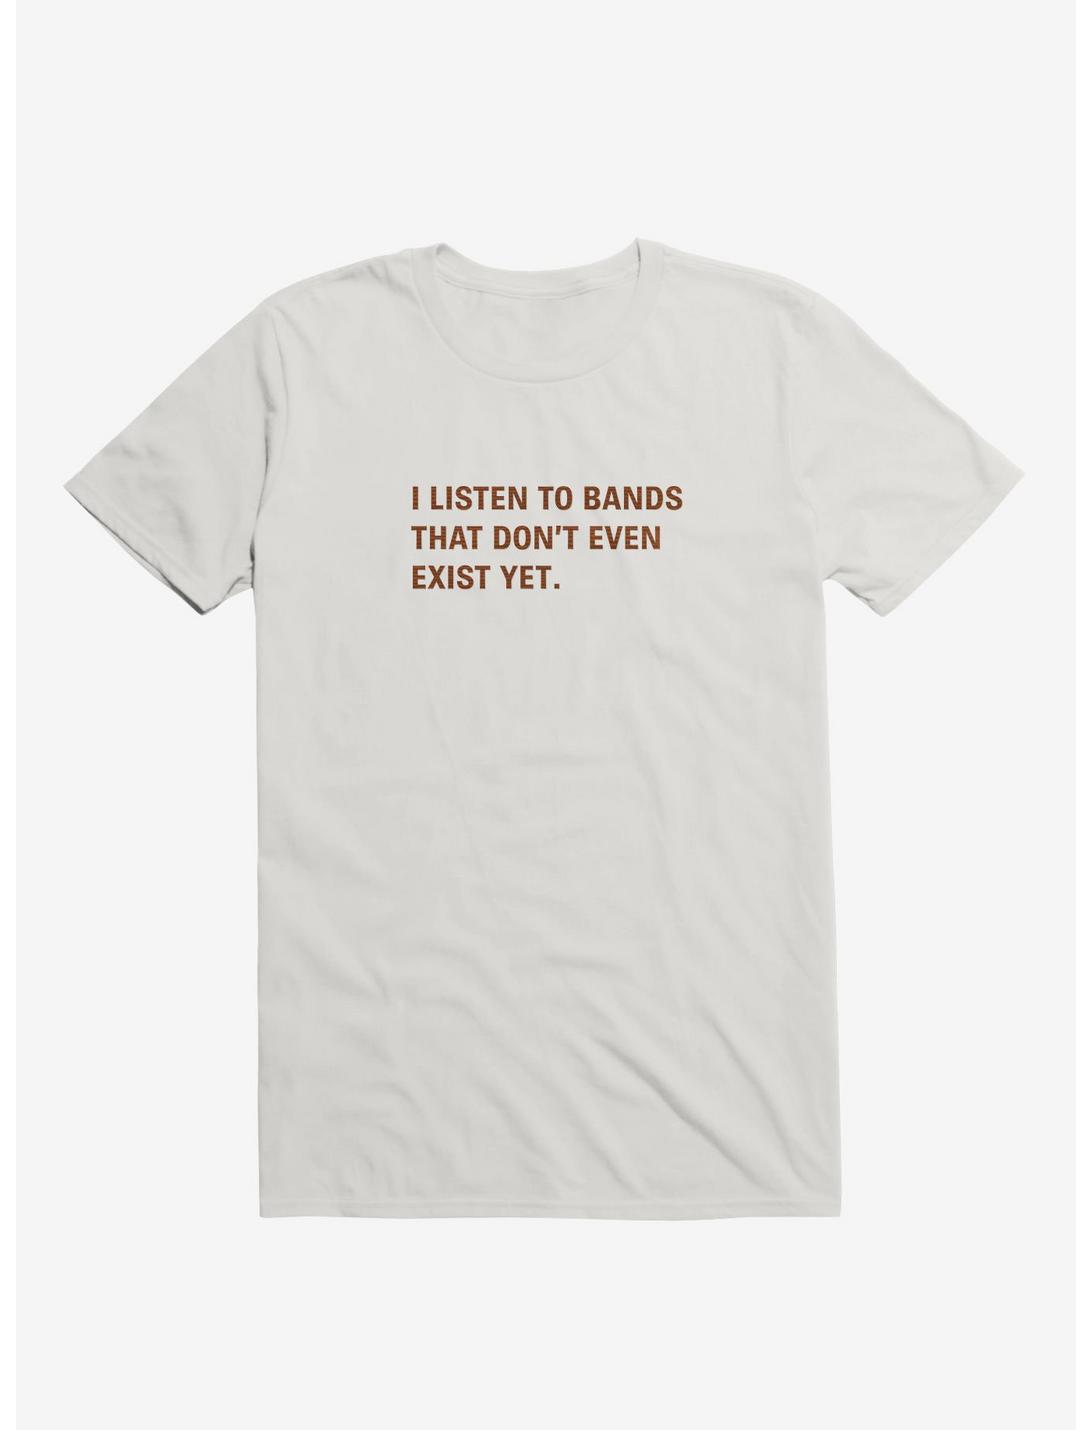 I Listen to Bands That Don't Even Exist Yet. T-Shirt, WHITE, hi-res